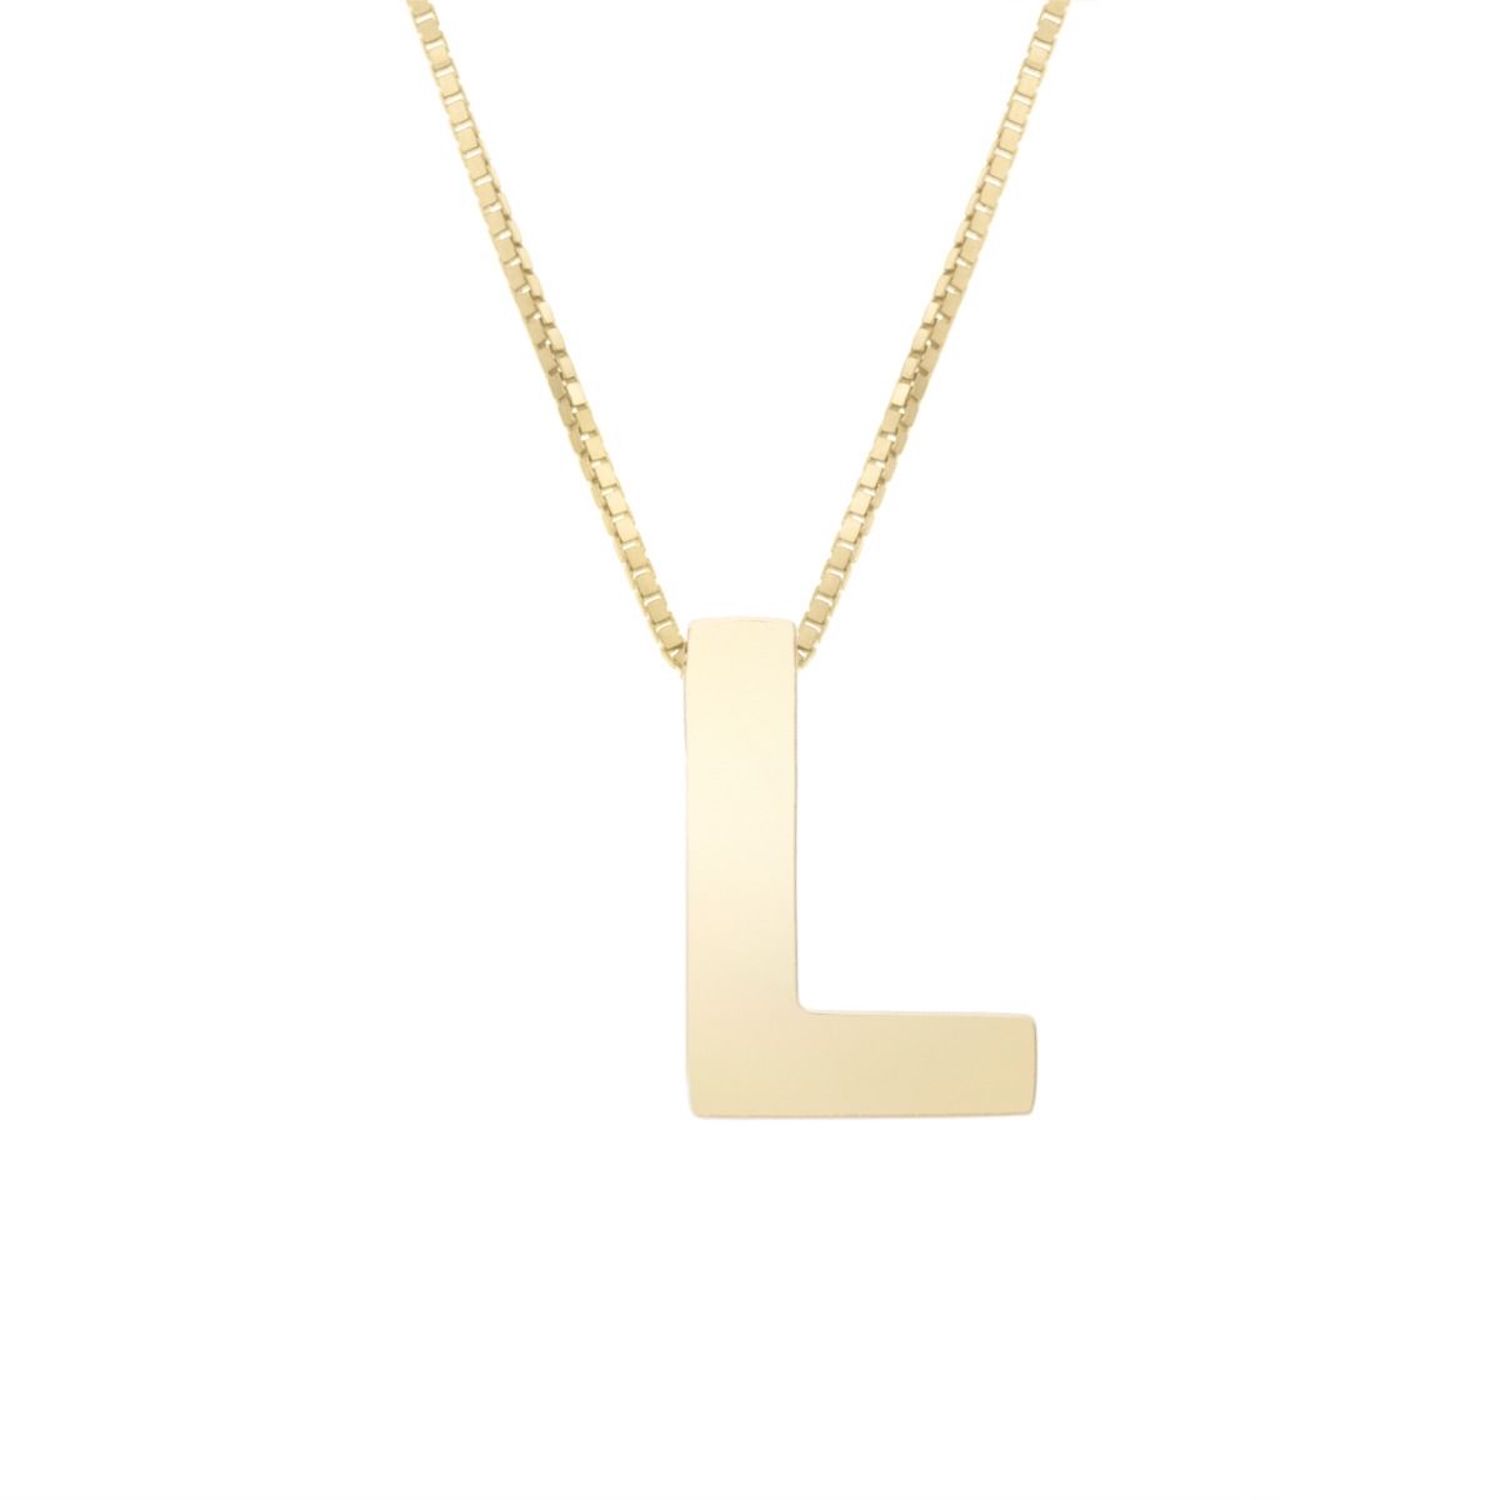 14K Yellow Gold Block Letter Initial Pendant Box Chain Necklace 16"-18" - L